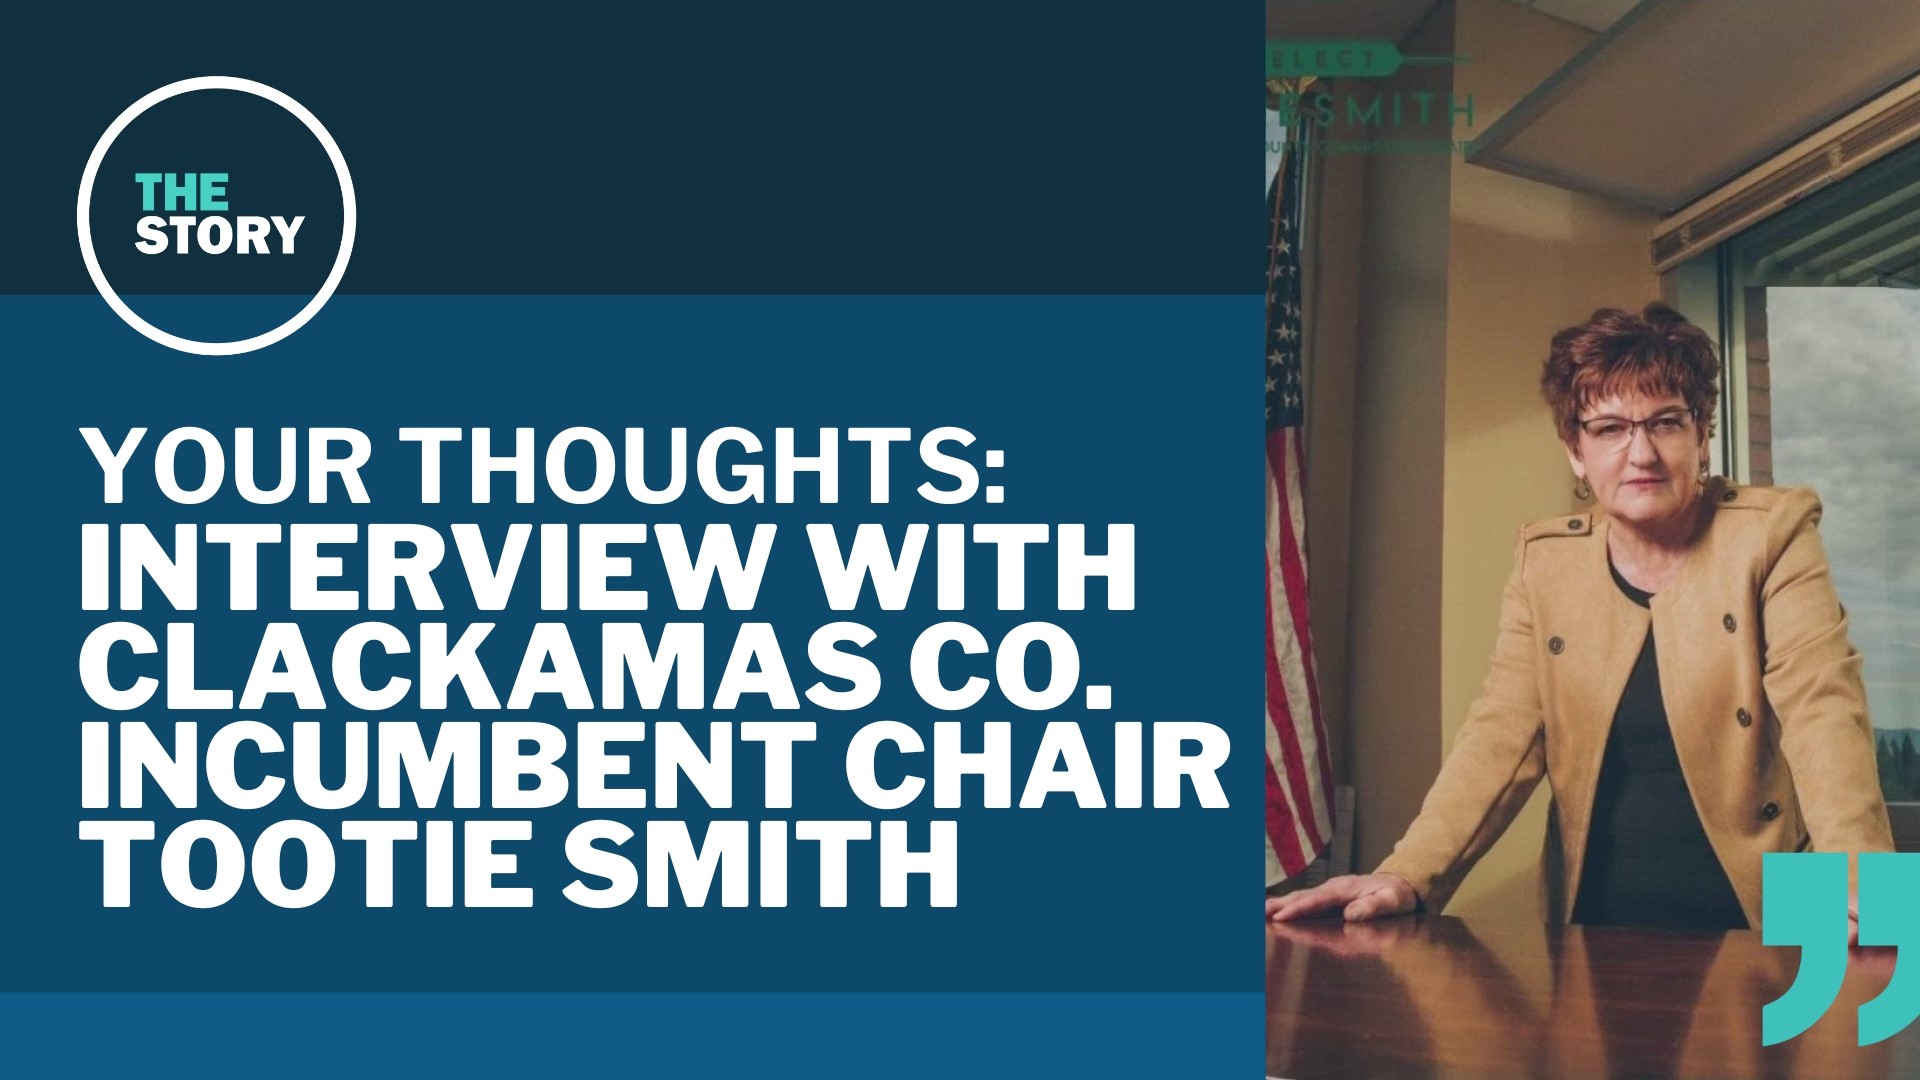 Yesterday we brought you our interview with Tootie Smith, who faces a challenge for county board chair this year. Here's what you had to say.